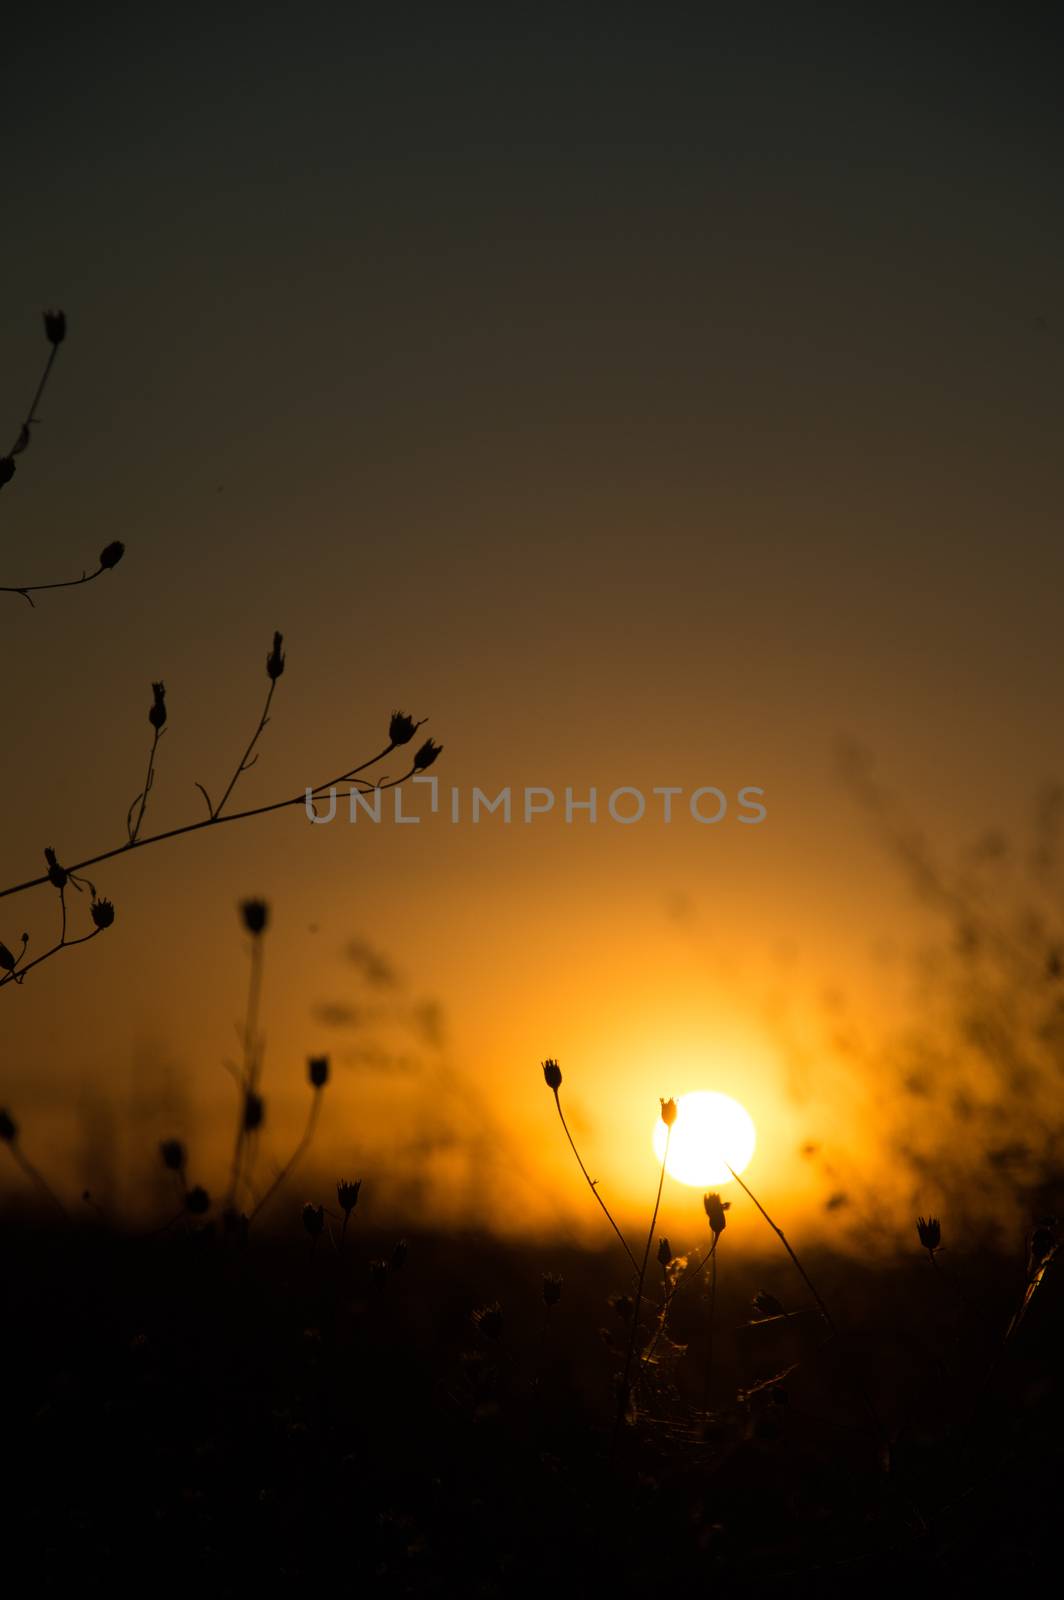 Blurry sunset with gras by natali_brill